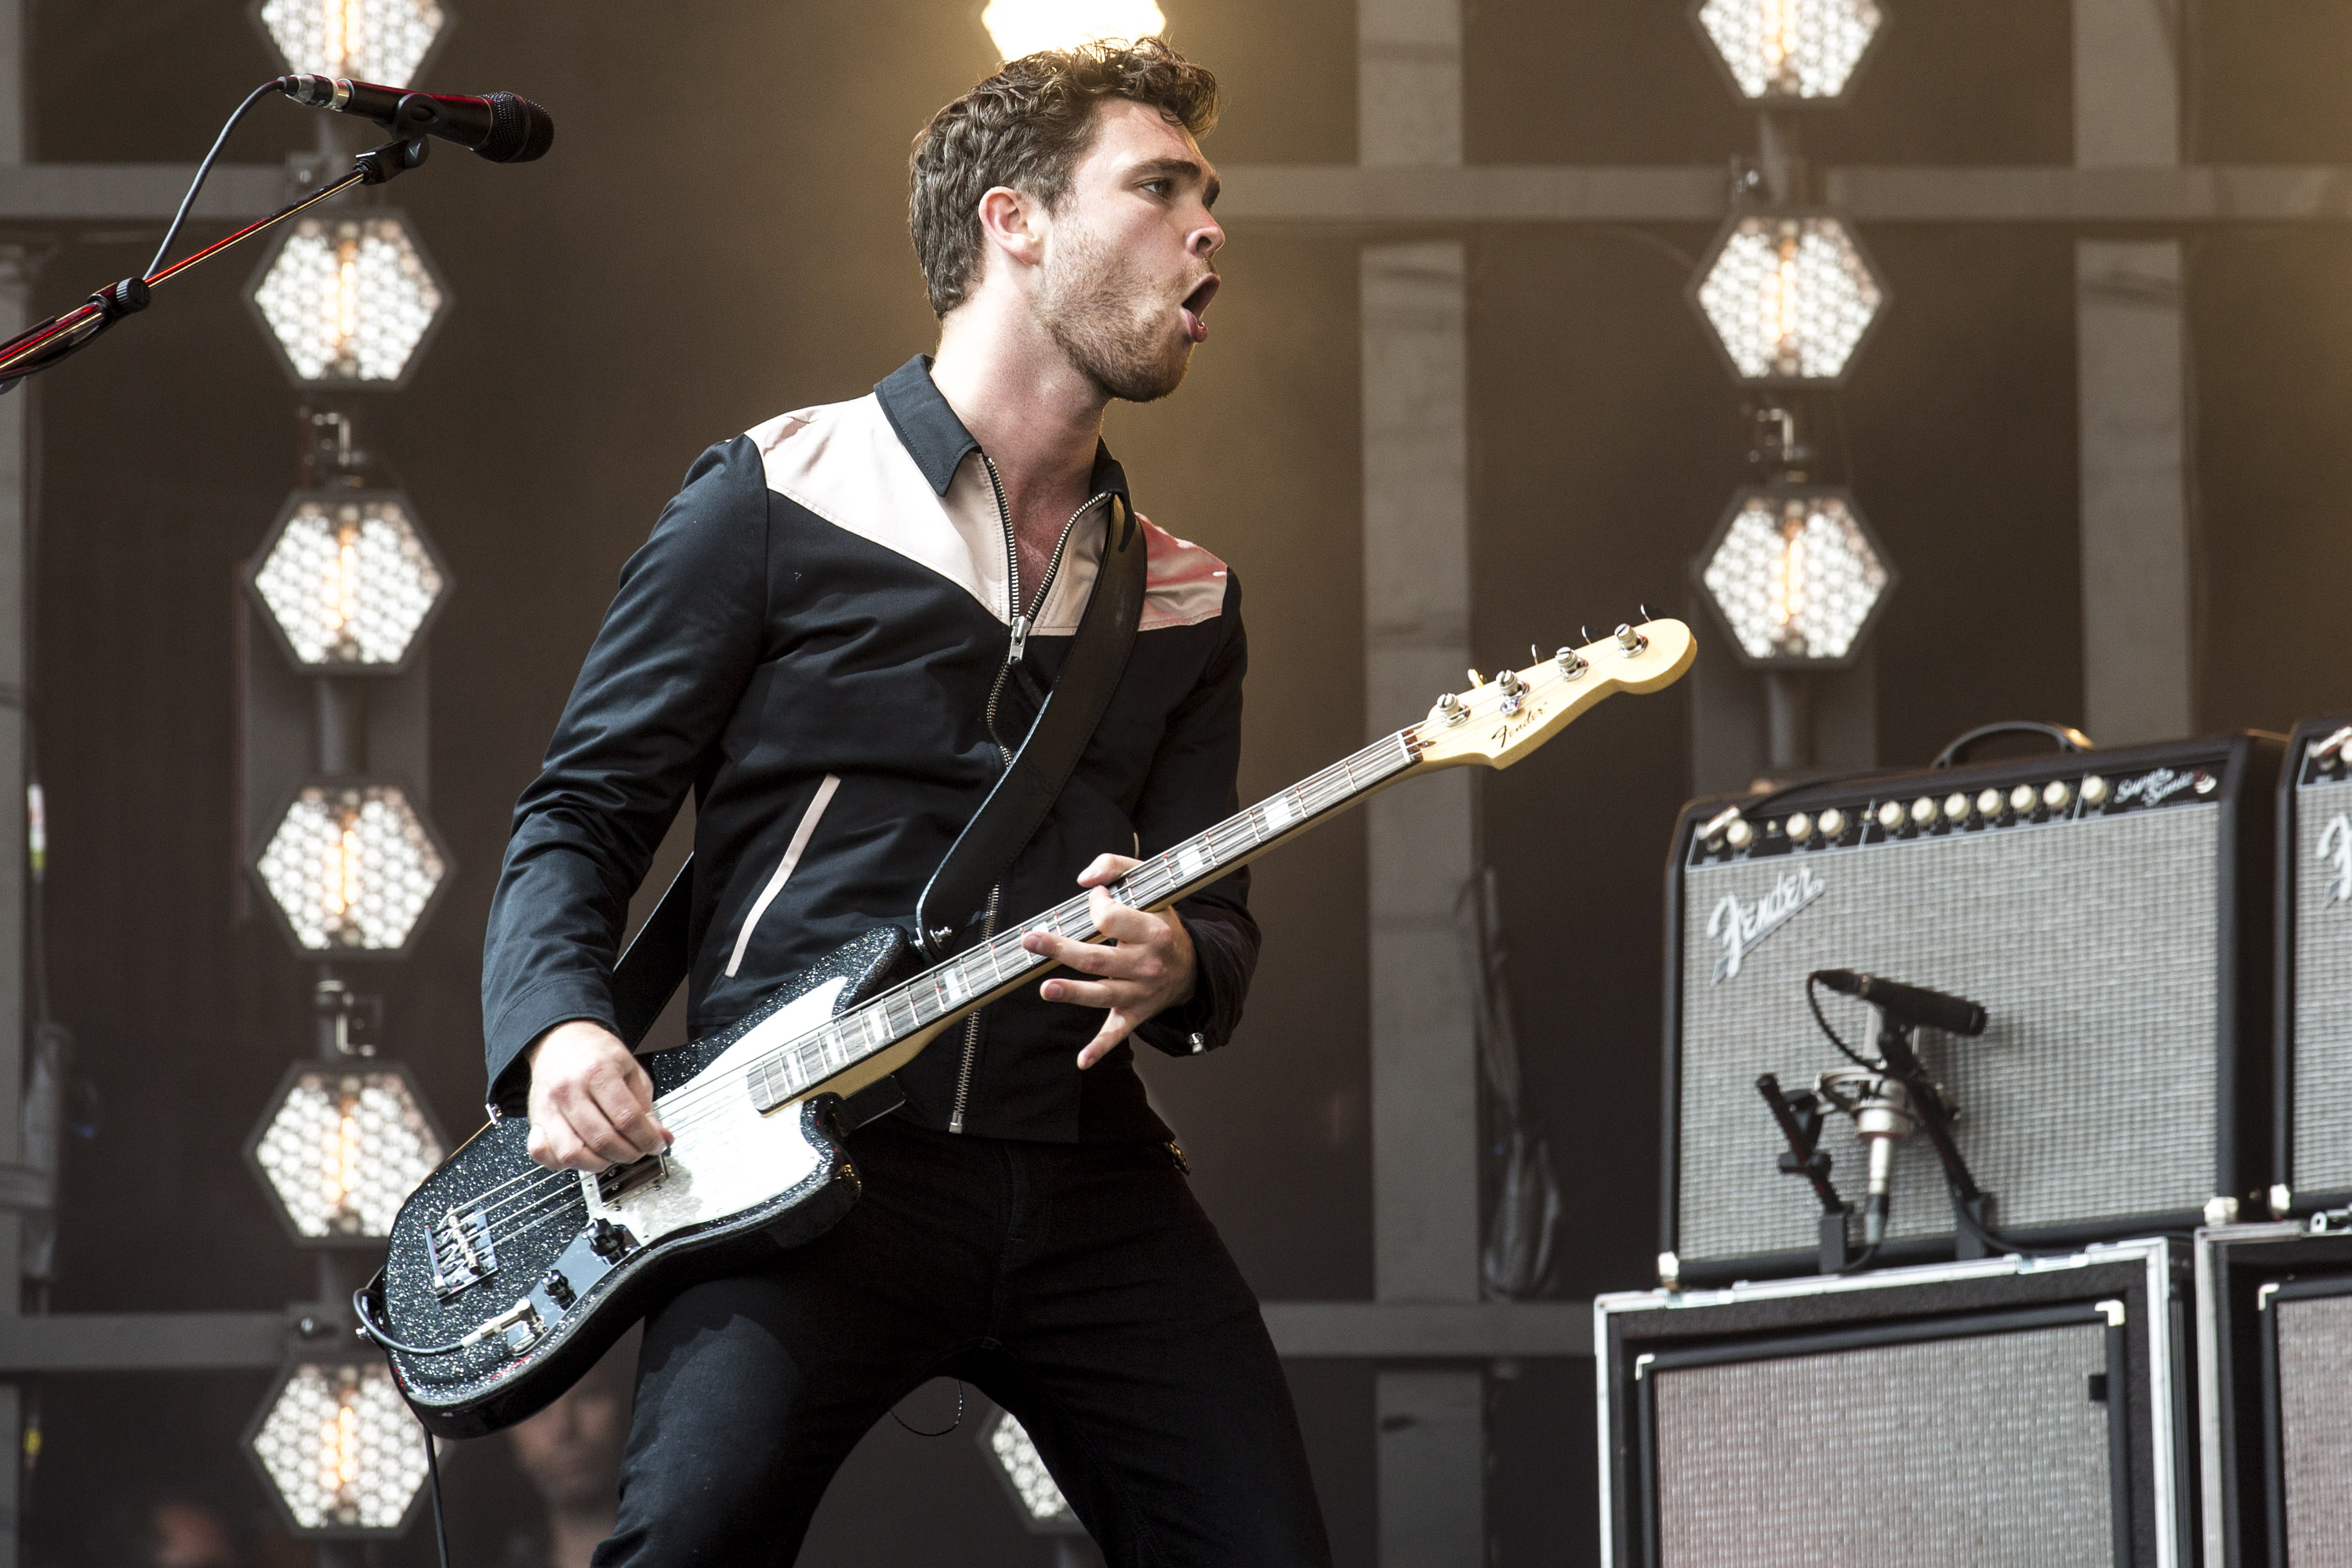 Royal Blood band member performing live with electric guitar in HD concert-themed desktop wallpaper background.